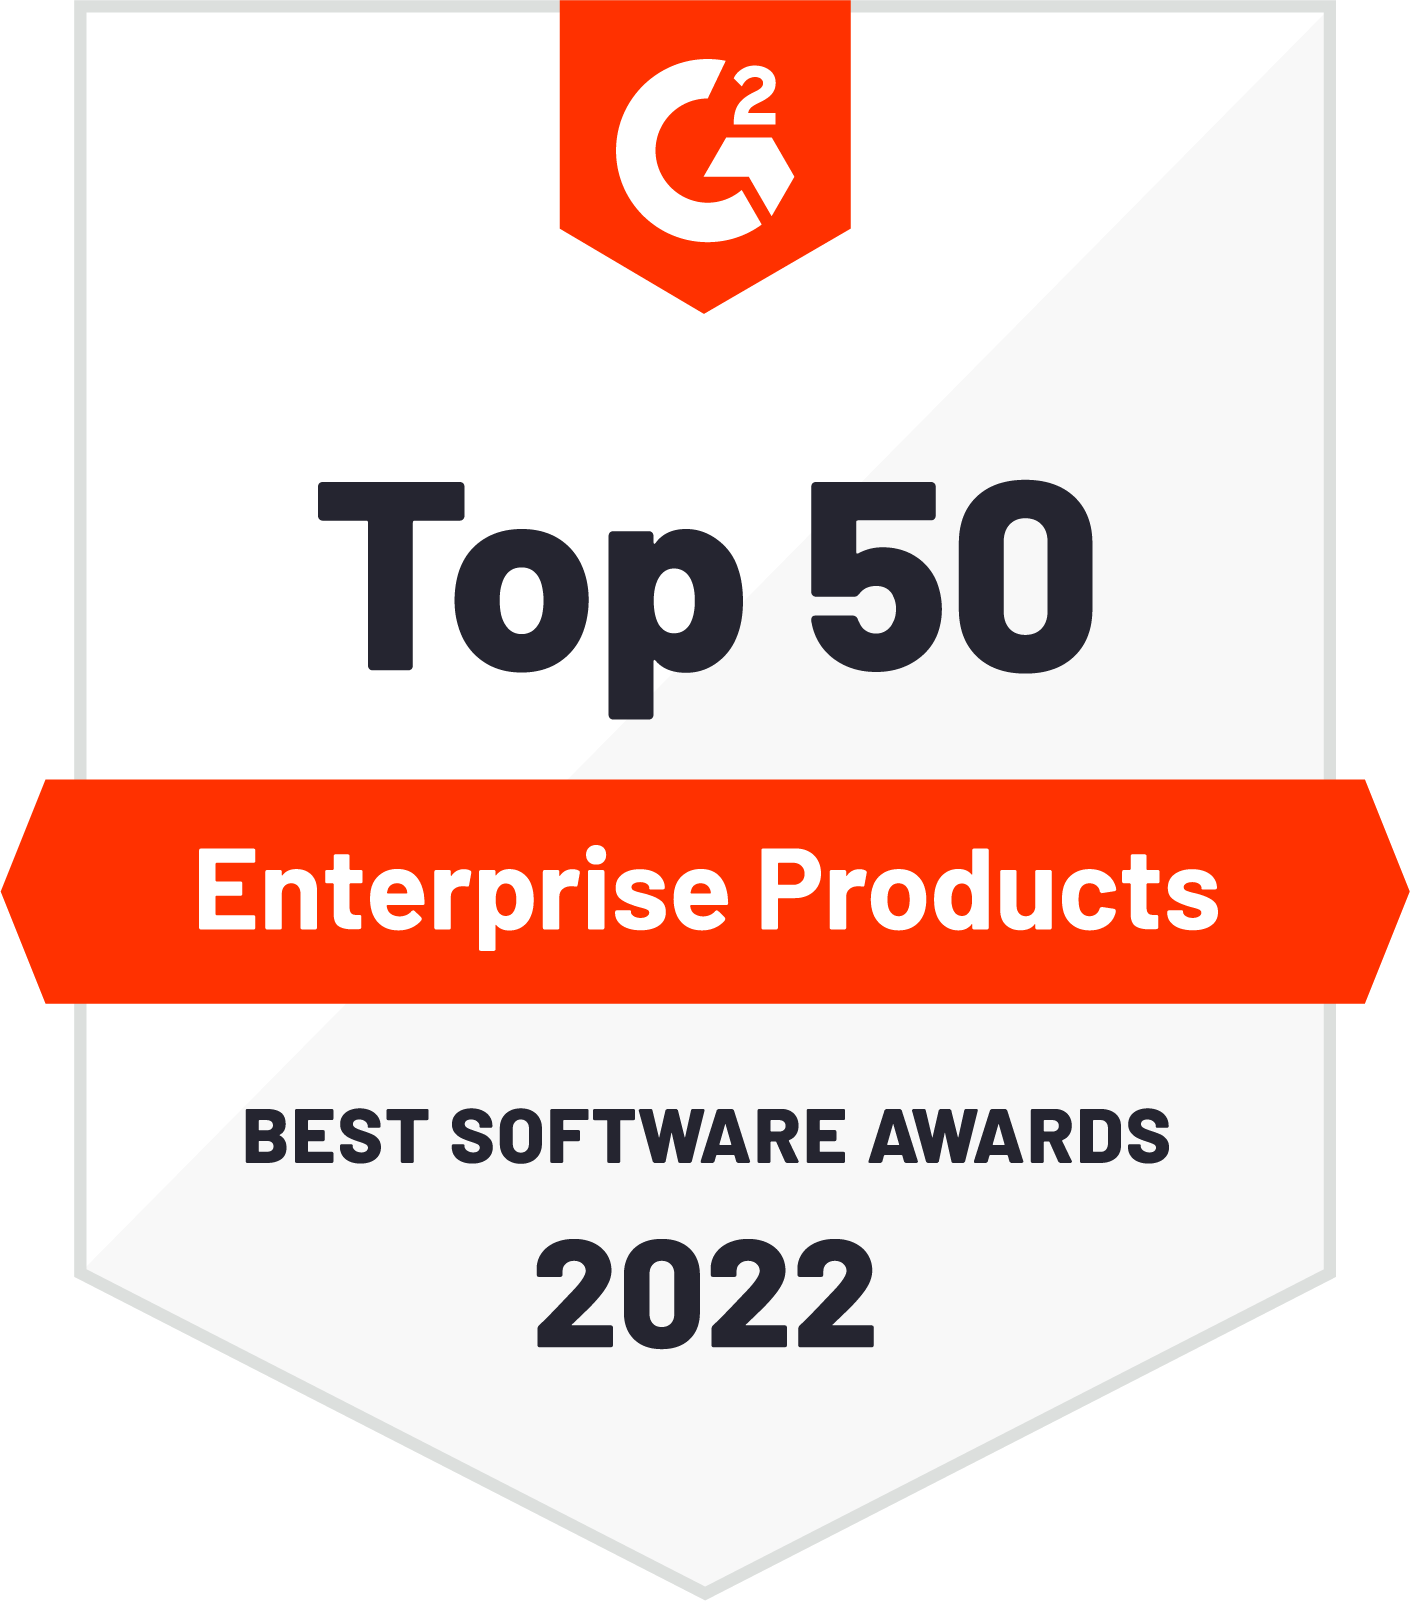 Anaplan earns G2 Best Software for Enterprise Products